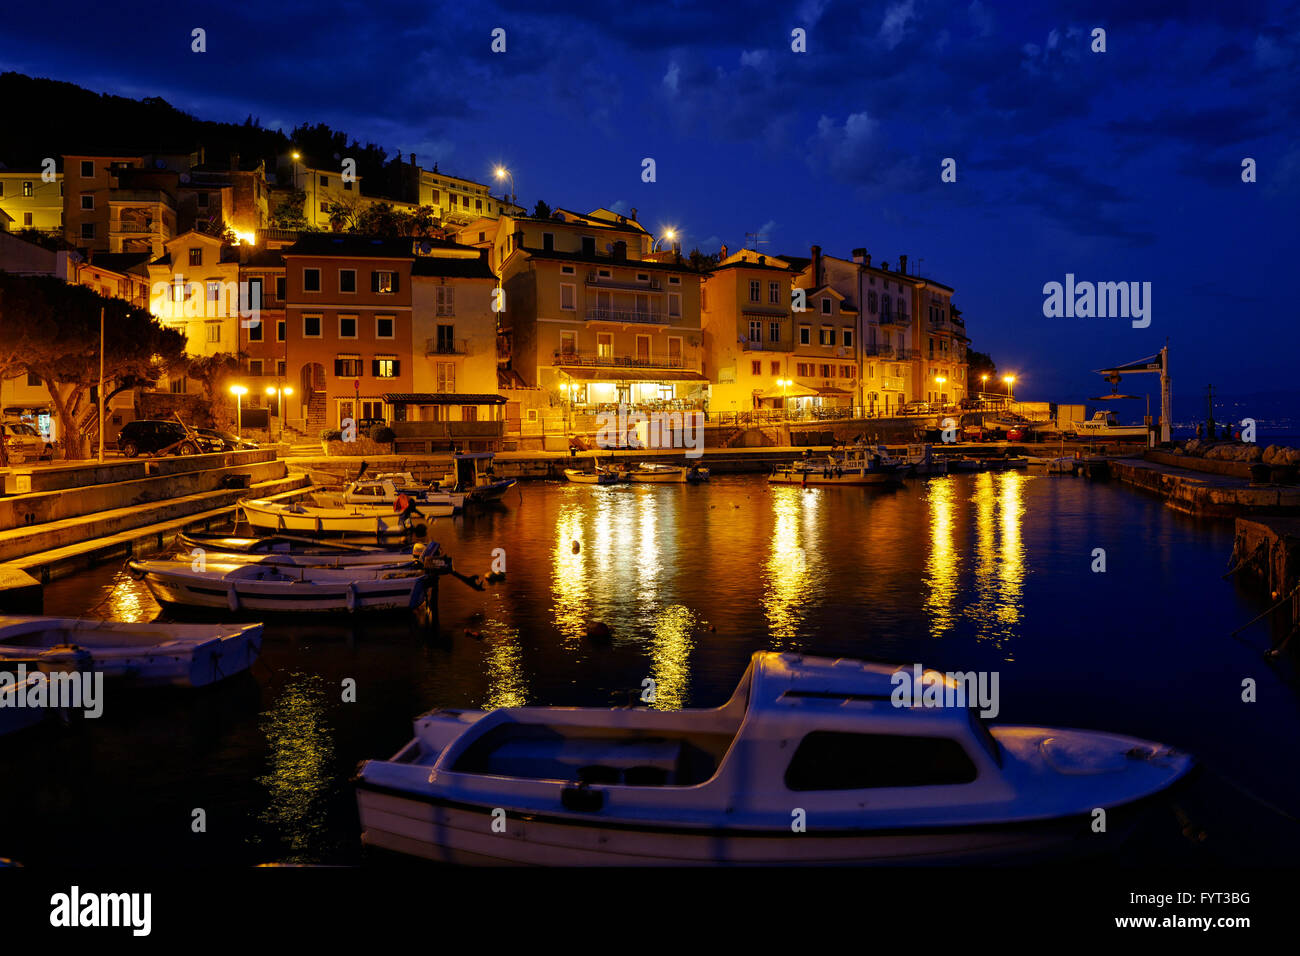 The little harbour in Moscenicka Draga, Istria, Croatia, at night Stock Photo